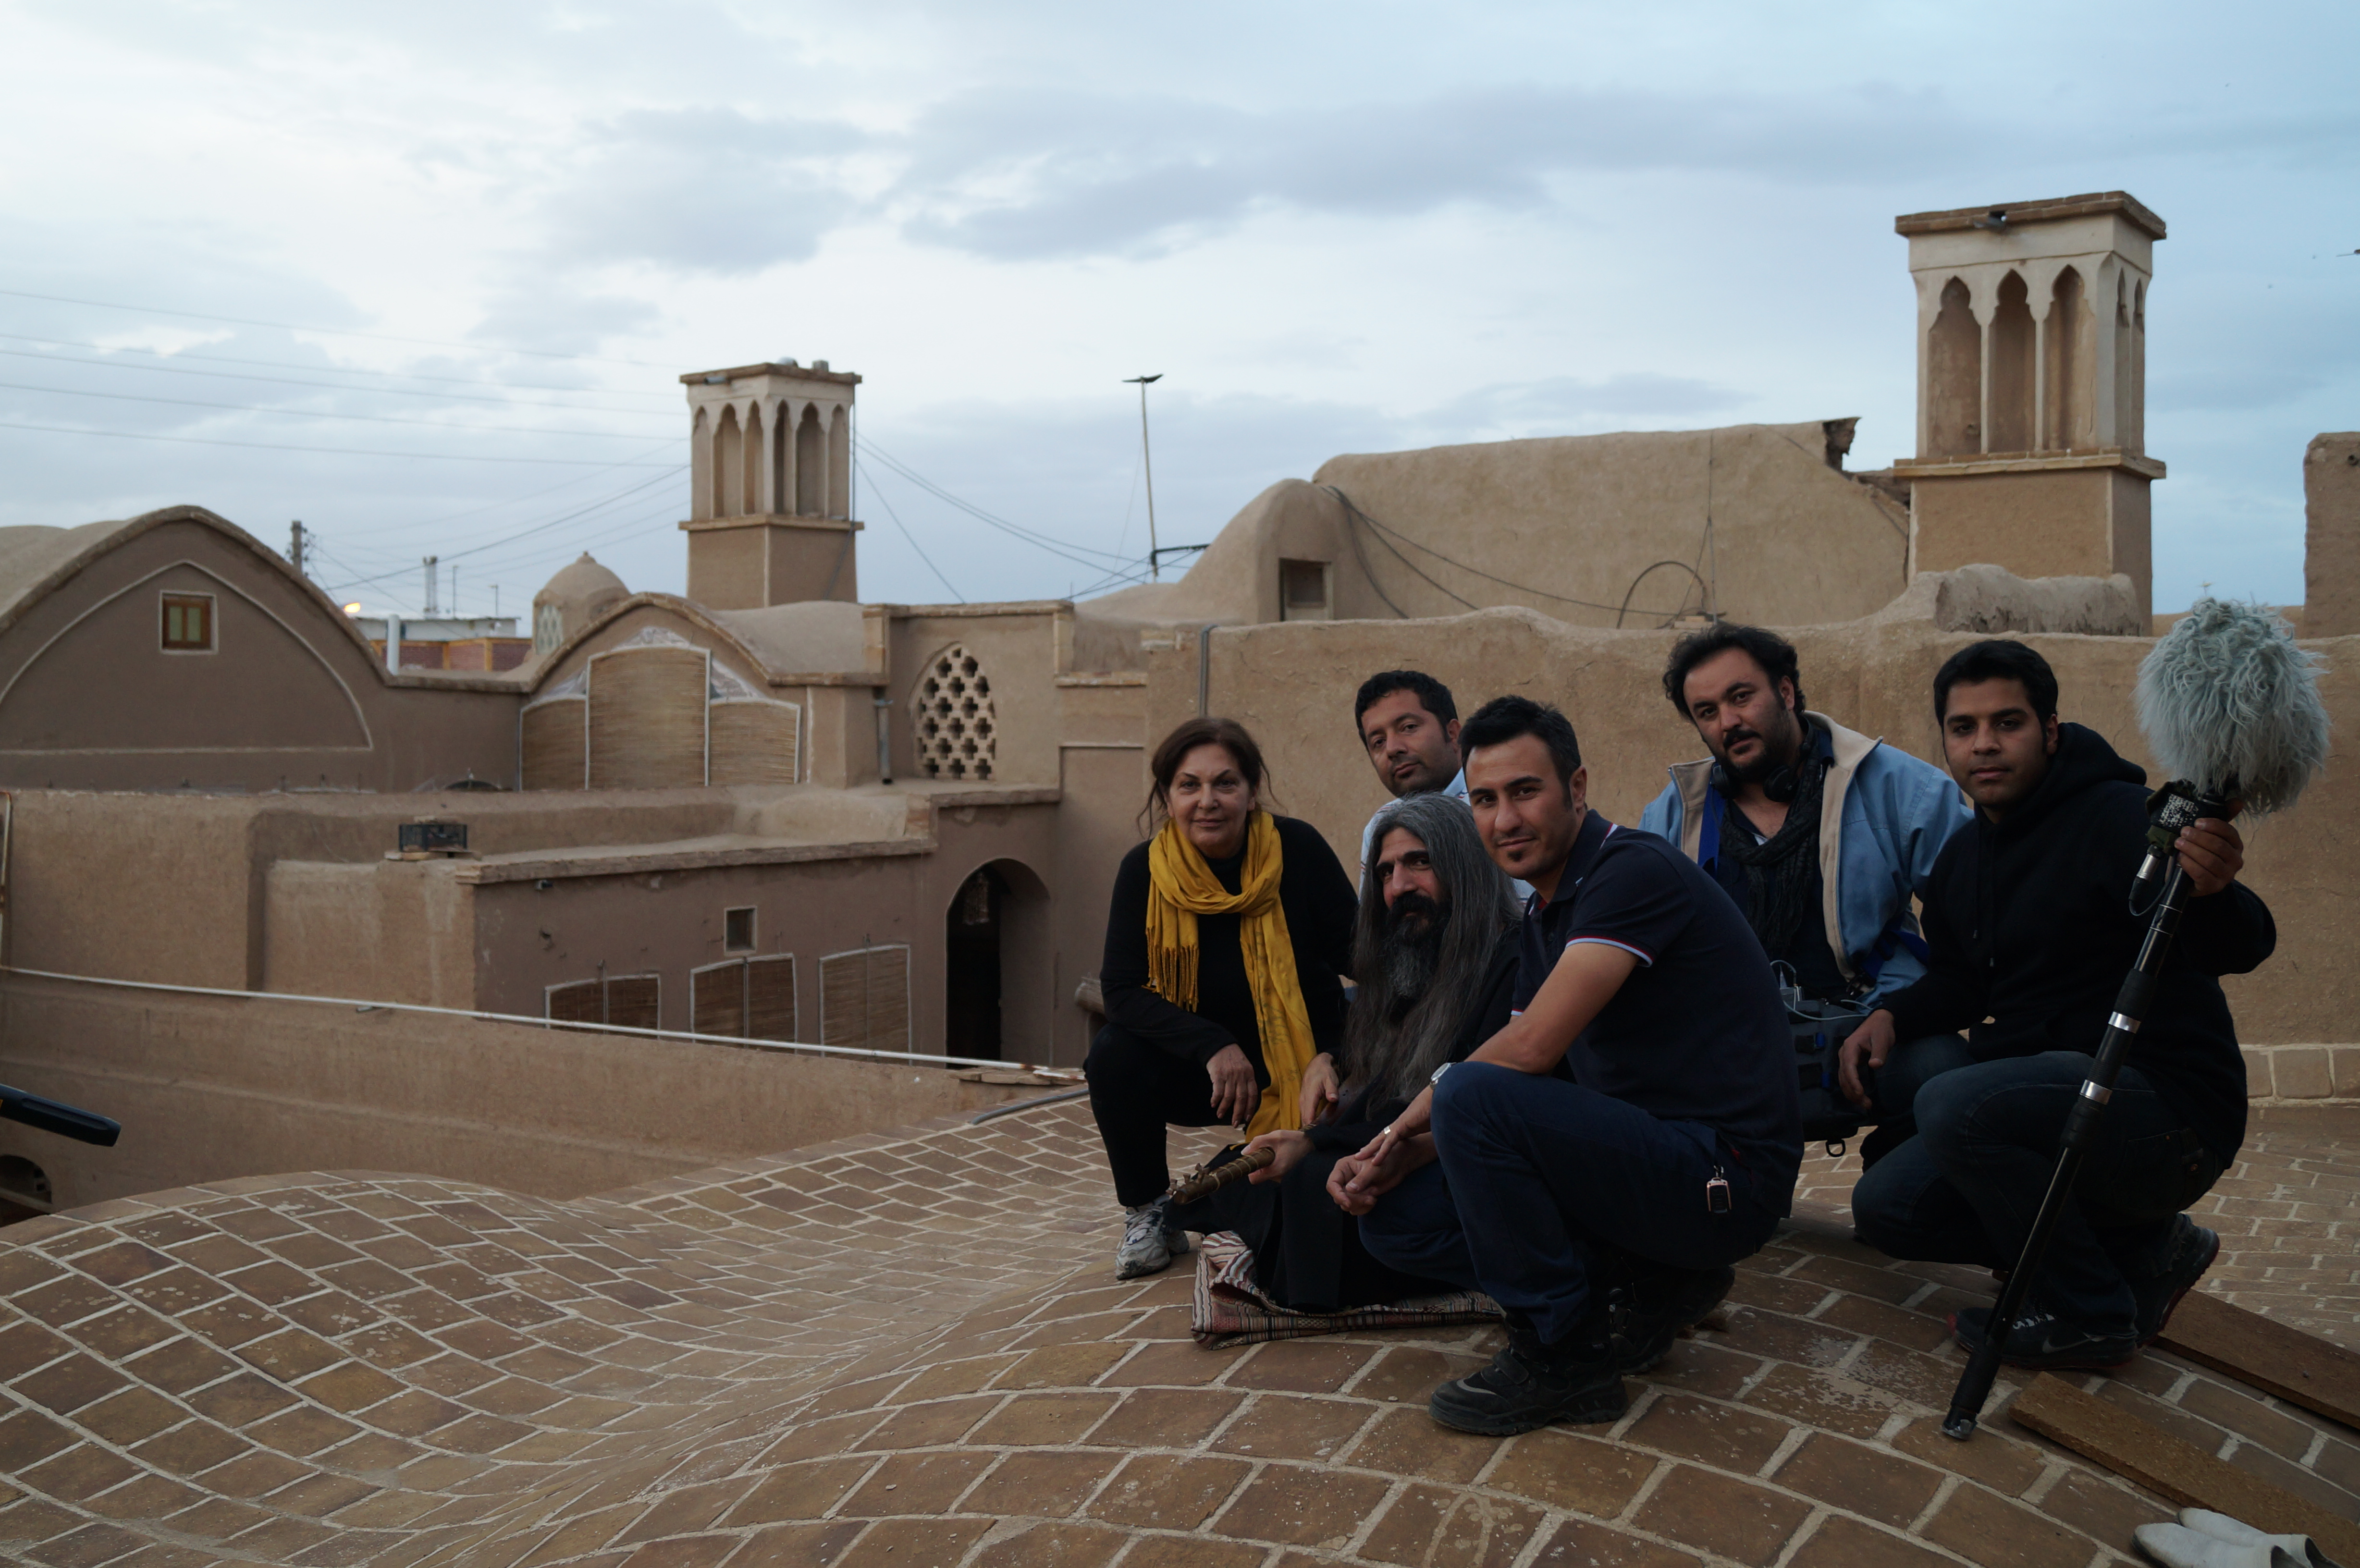 Filming in historic city of Kashan, Iran